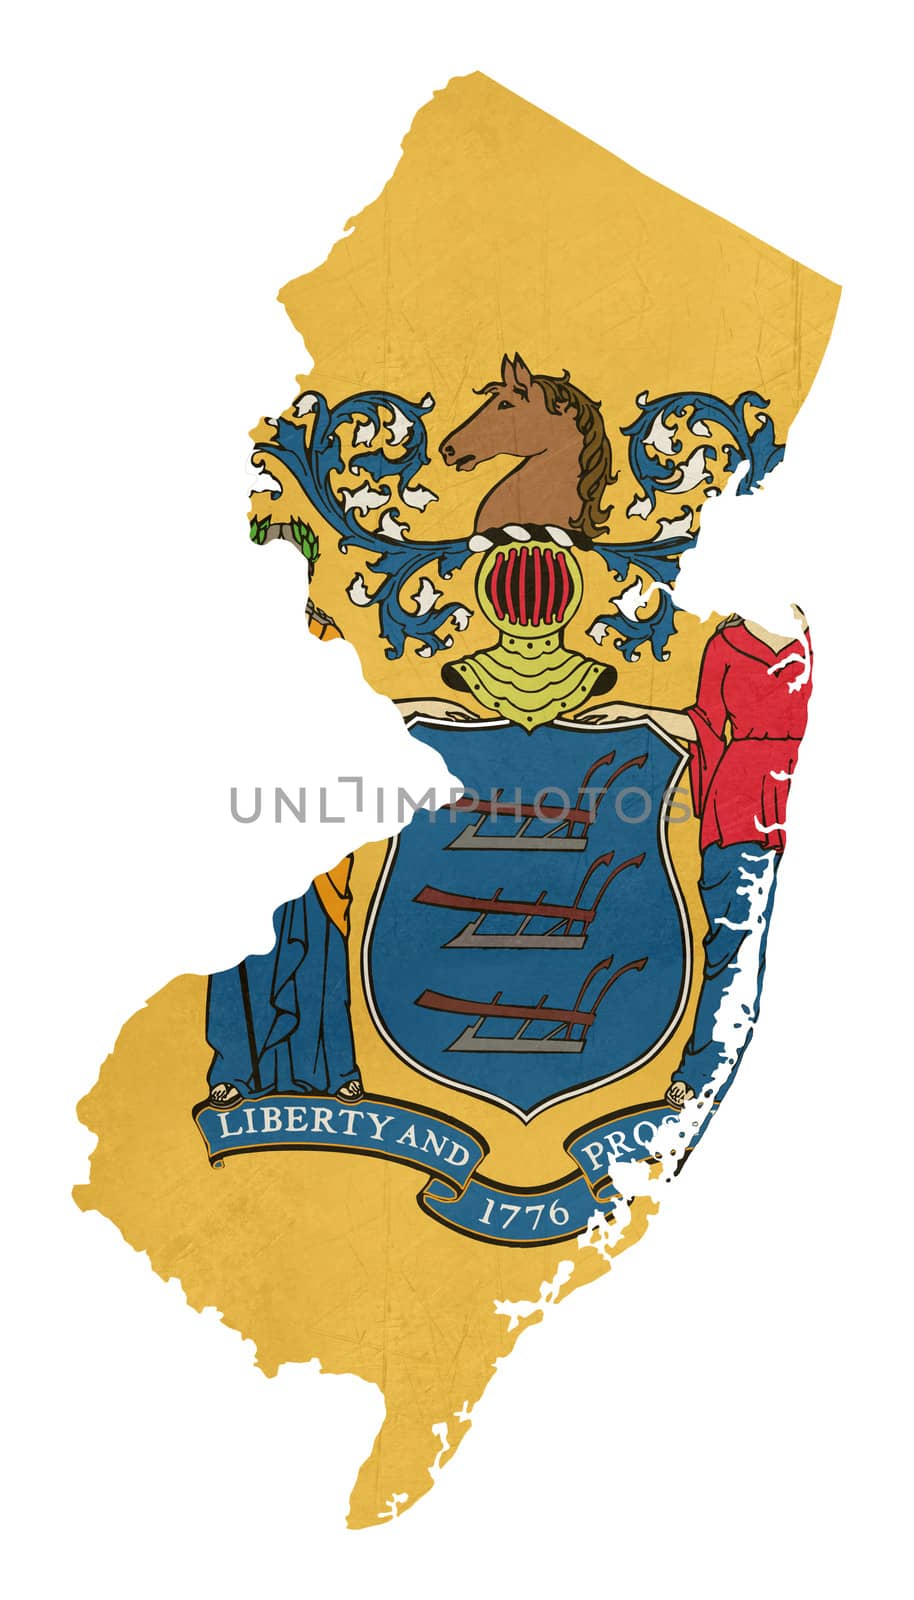 Grunger state of New Jersey flag map isolated on a white background, U.S.A.